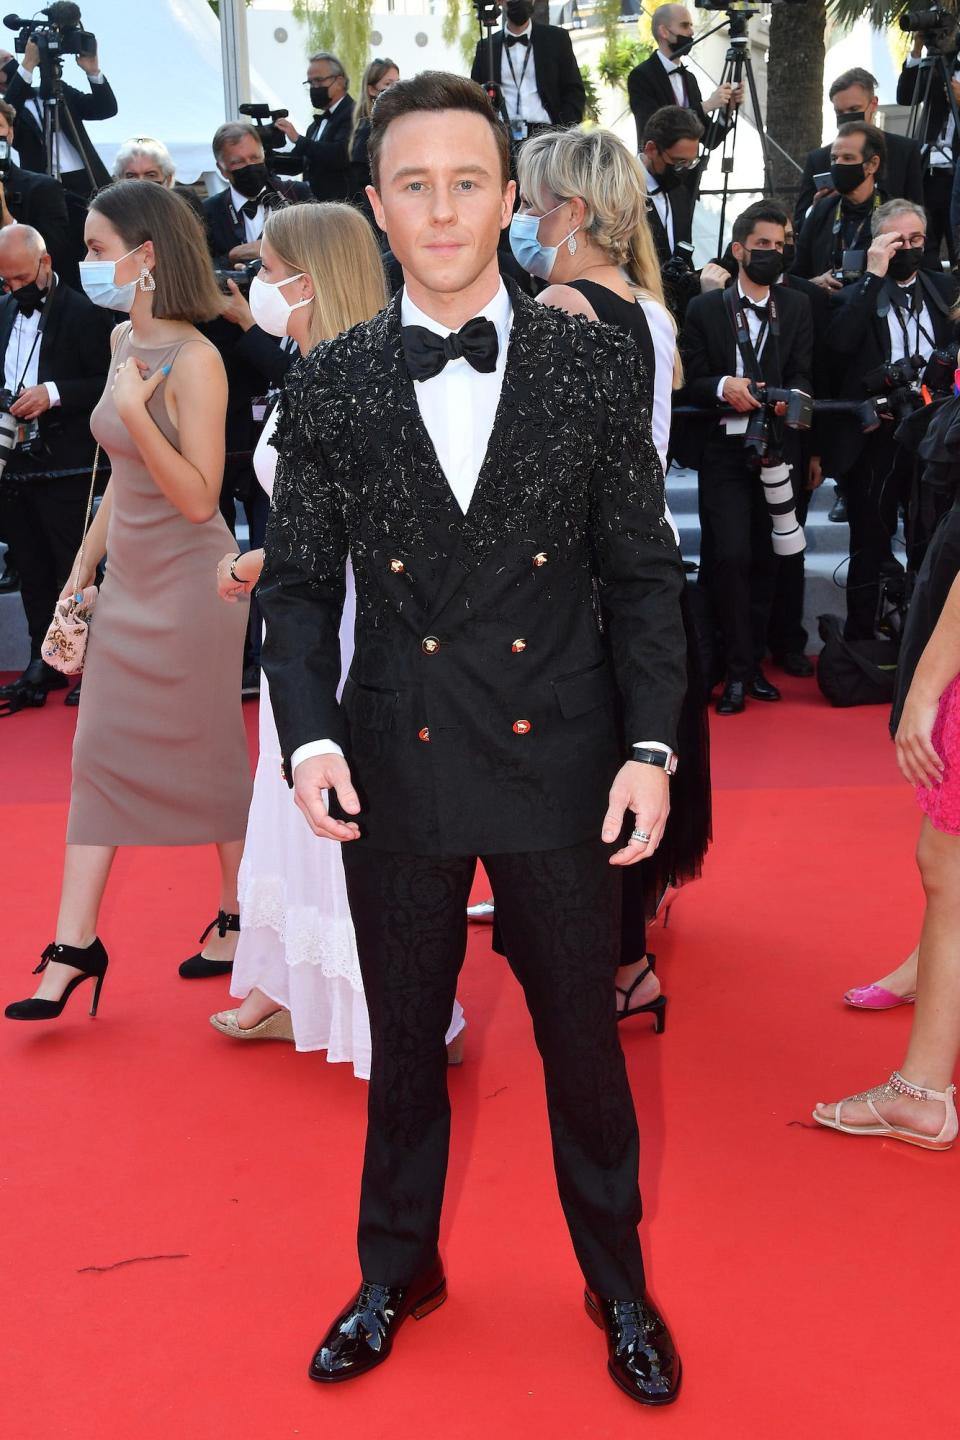 Matthew Postlethwaite wears a beaded suit at the 2021 Cannes Film Festival.